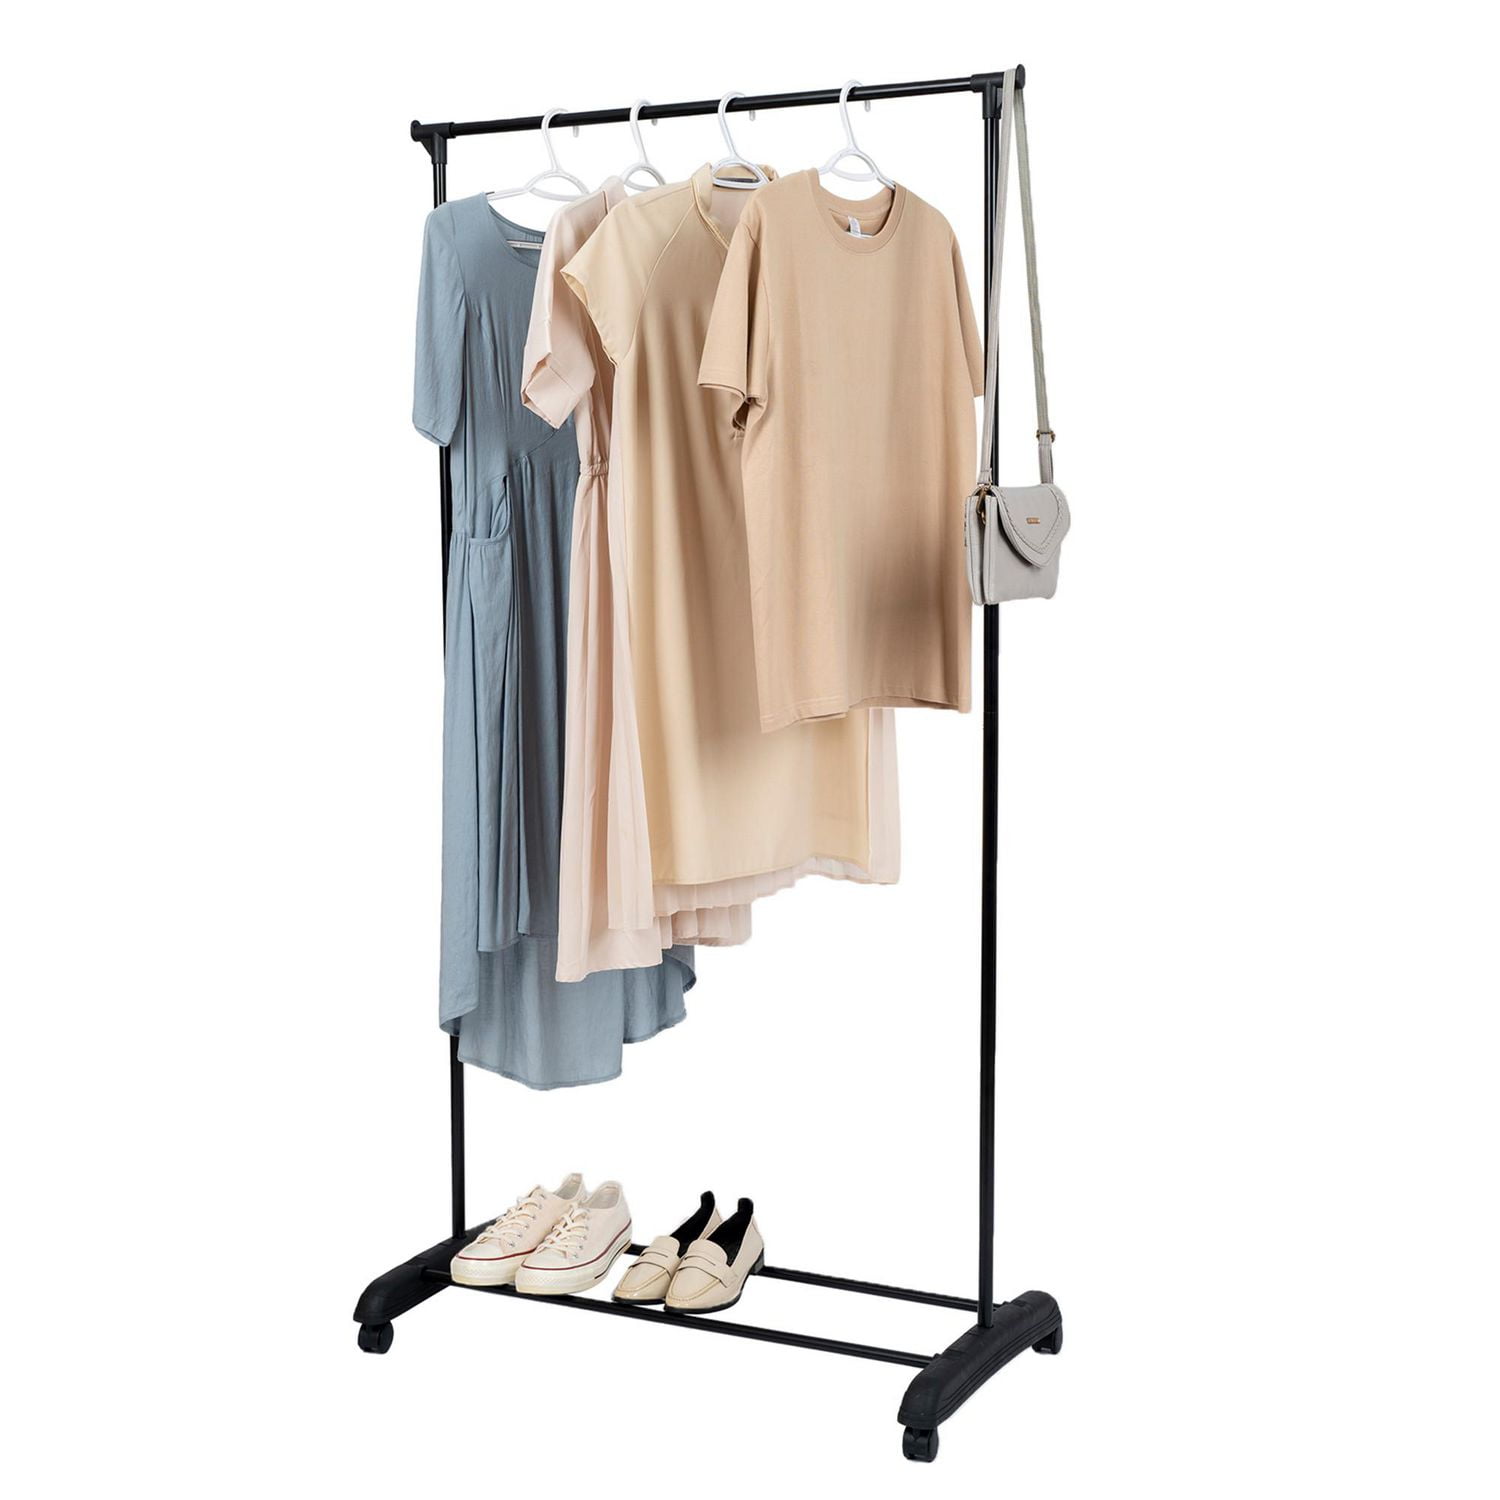 Mainstays Simple Single Rod Garment Rack, Black, Assembled size:  35in.Wx17.5in.Dx68in.H; Perfect rack for T-shirt, skirt , other light  clothes and shoes. 